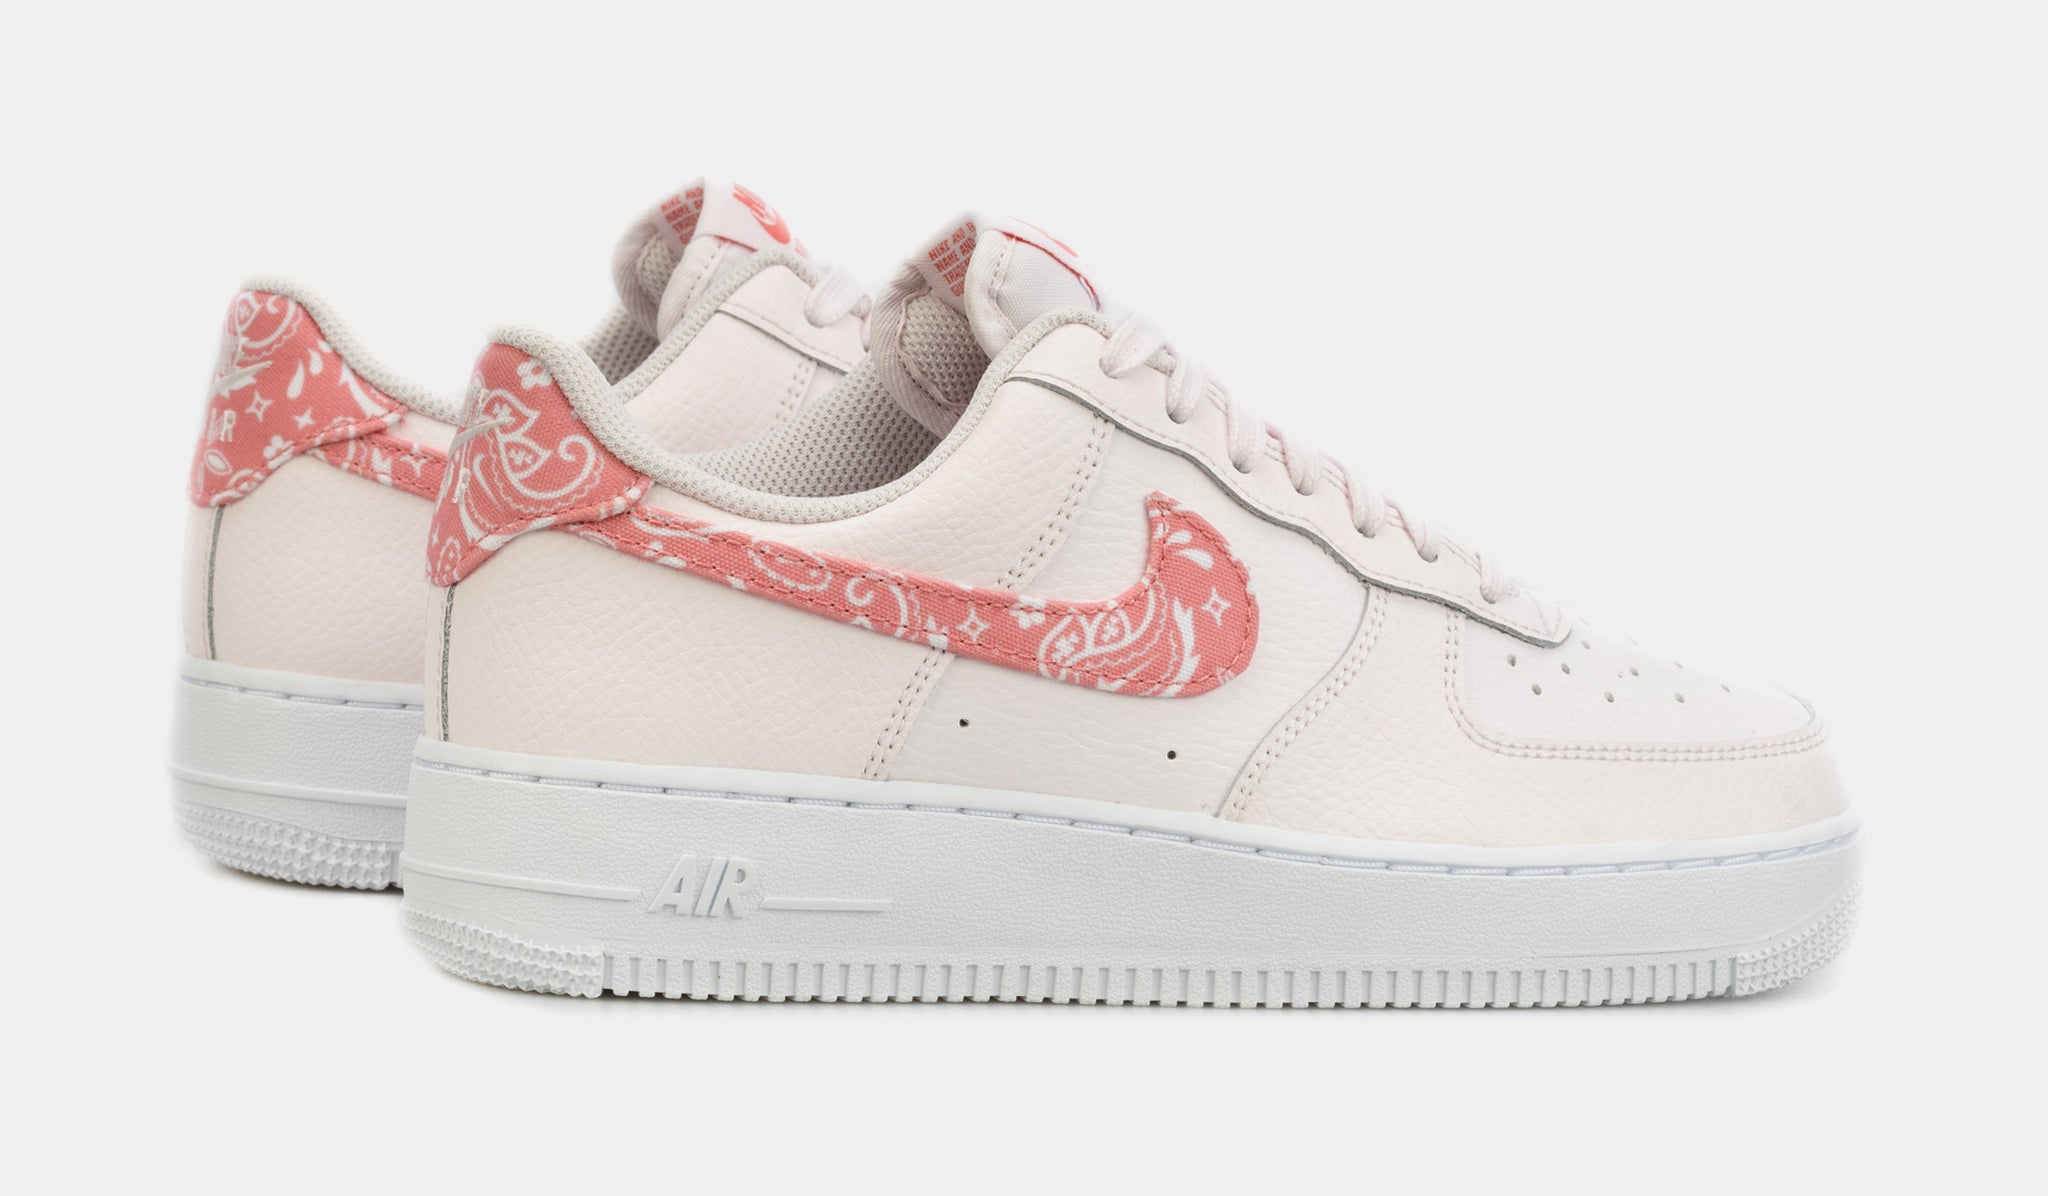 Nike Air Force 1 Low '07 Paisley Pink FD1448-664 Women's Size 8.5  Shoes #27C